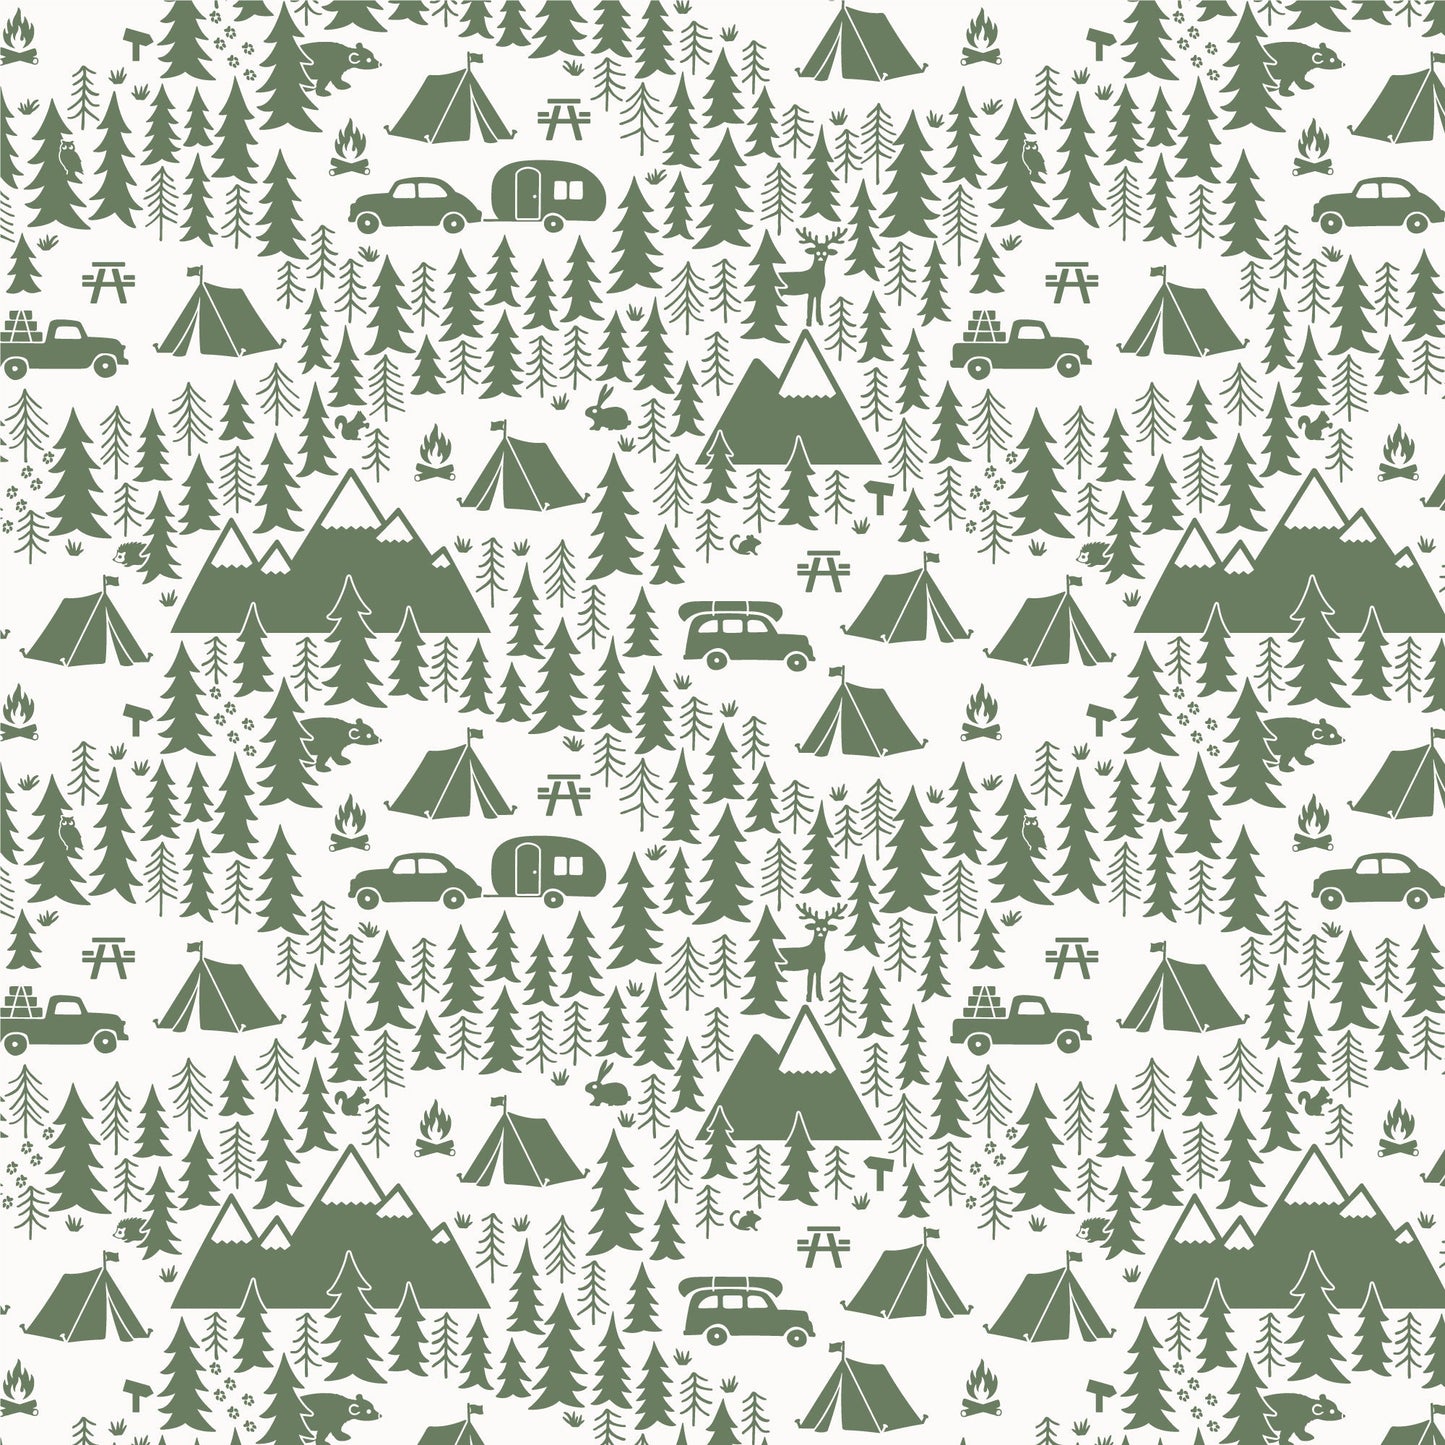 Baby Tank Top - Campground Forest Green